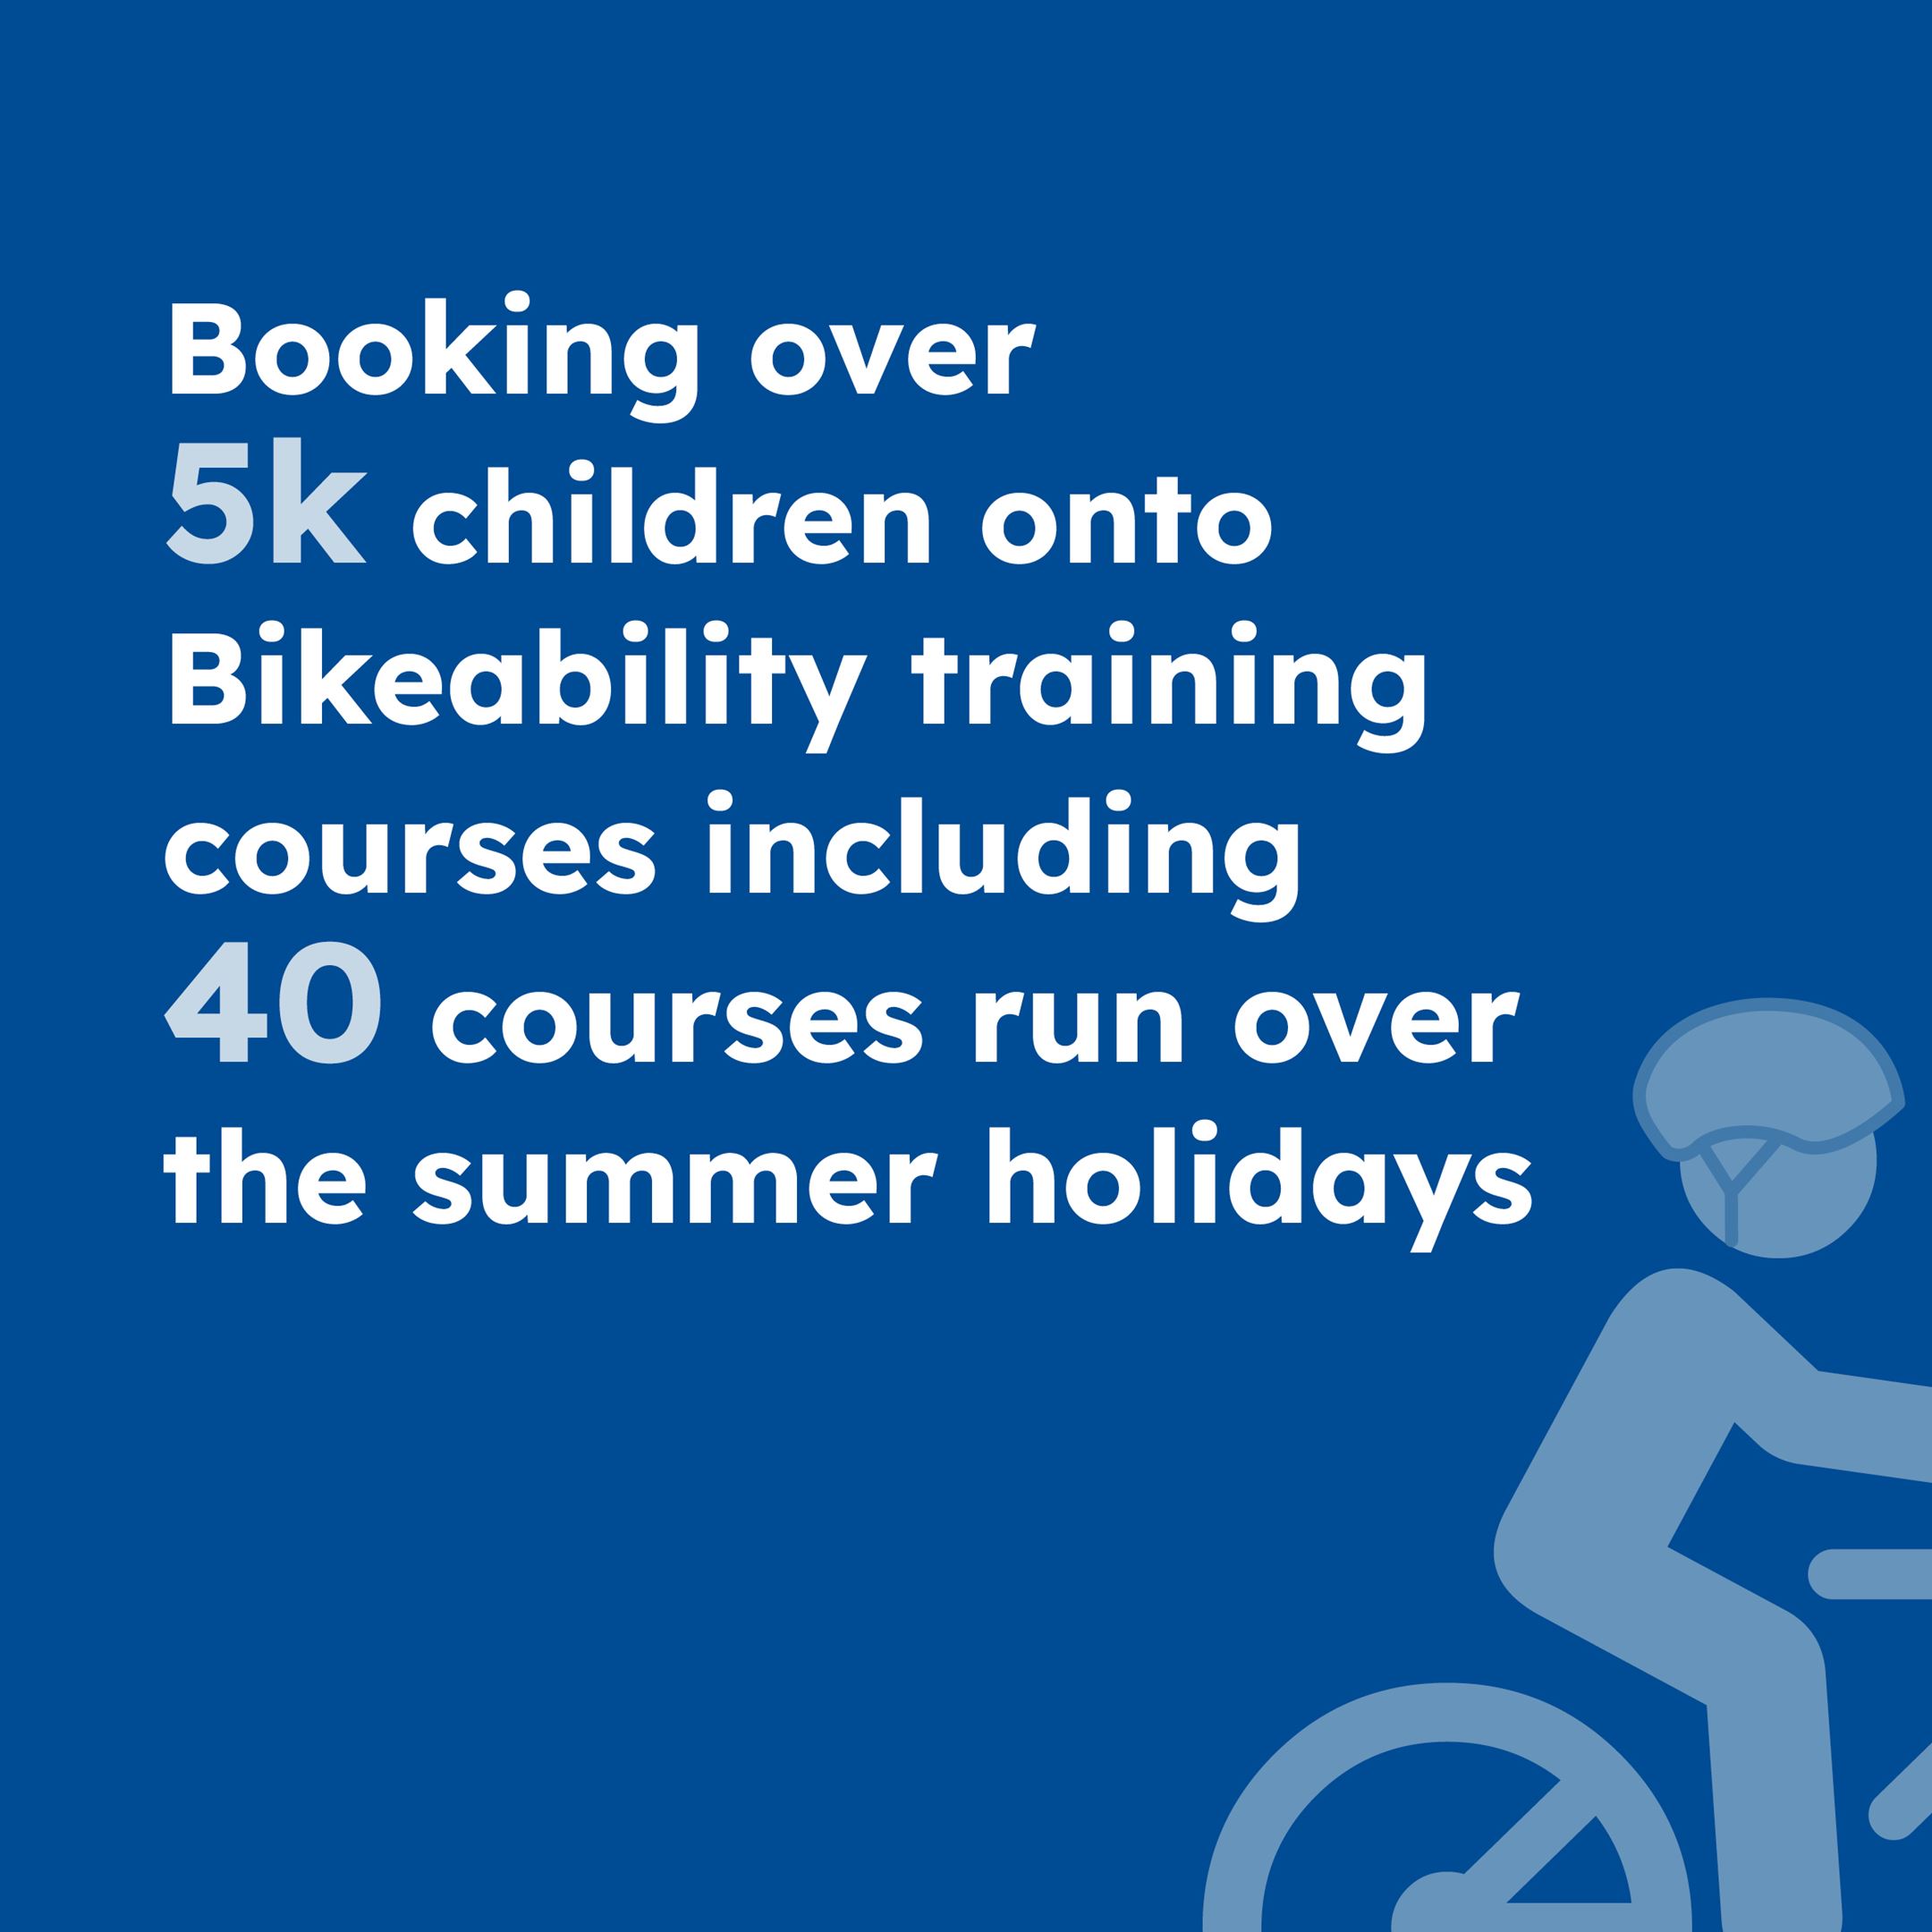 Booking over 5k children onto Bikeability training courses including 40 courses run over the summer holidays